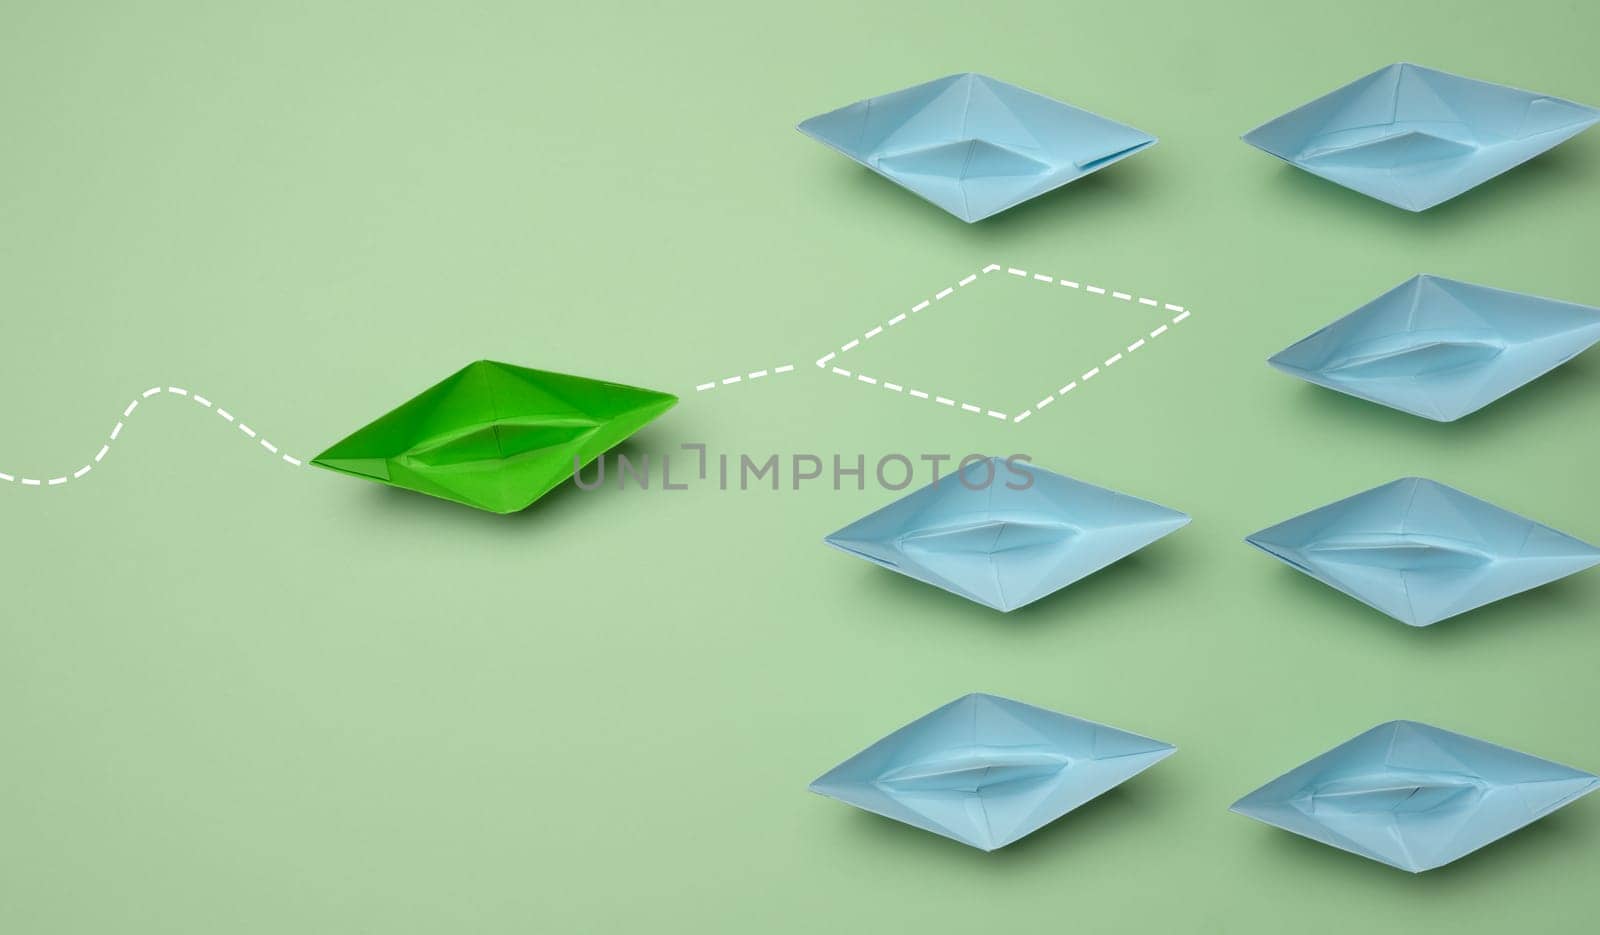 Group of blue paper boats heading in one direction and one green one heading in the opposite direction. The concept of individuality, uniqueness and talent of the employee. Get away from the influence